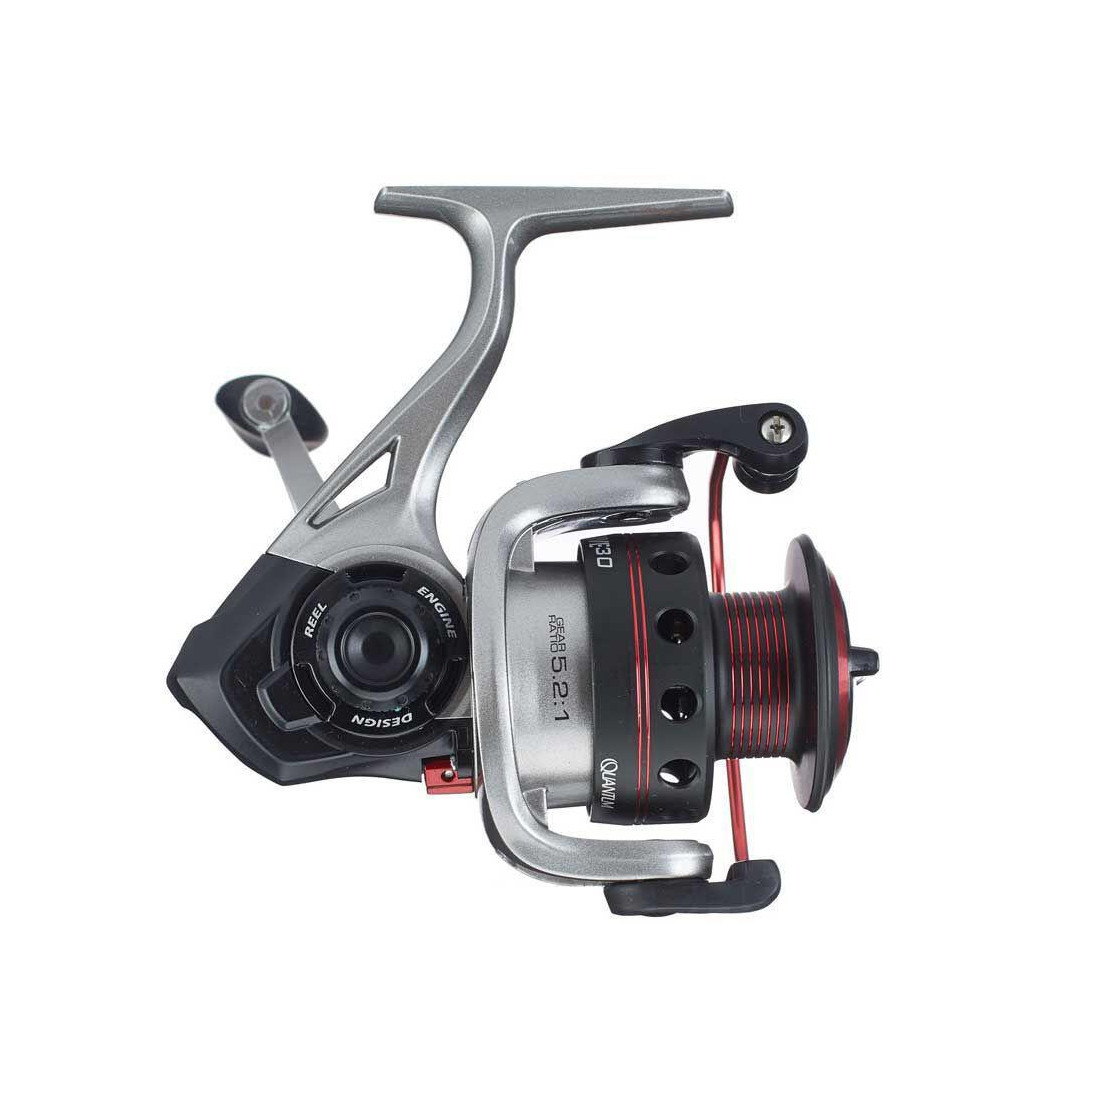 Precisely-Aligned Gears Continuous Anti-Reverse Fishing Reel with Smooth Quantum Drive Spinning Reel 